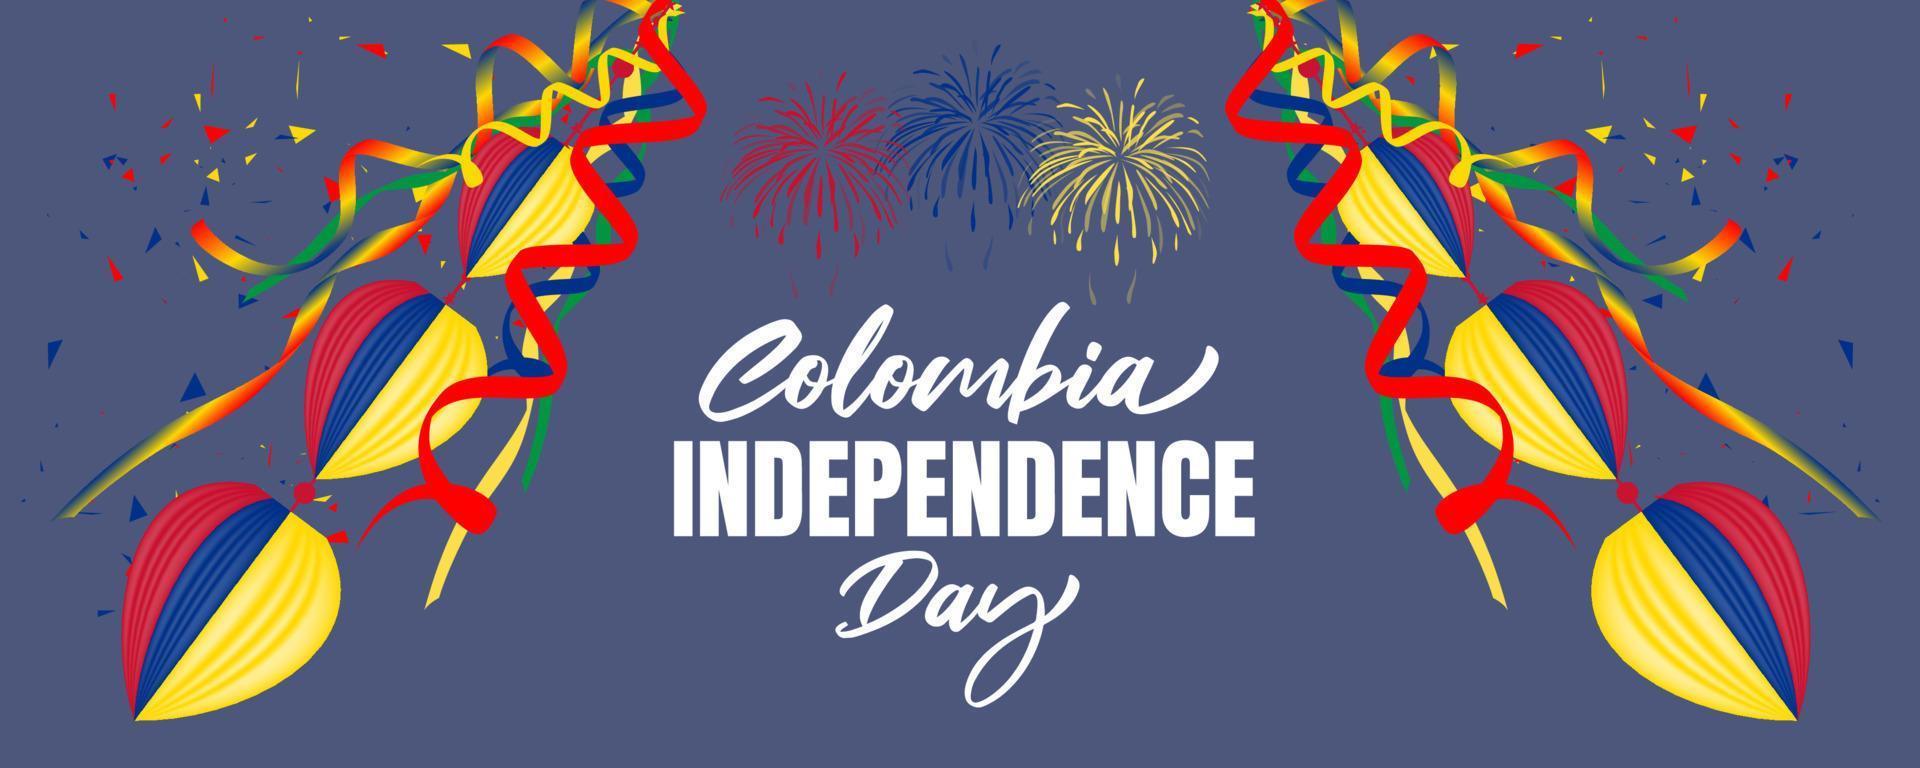 Colombia independence day with  colorful ribbon and blue color background design vector